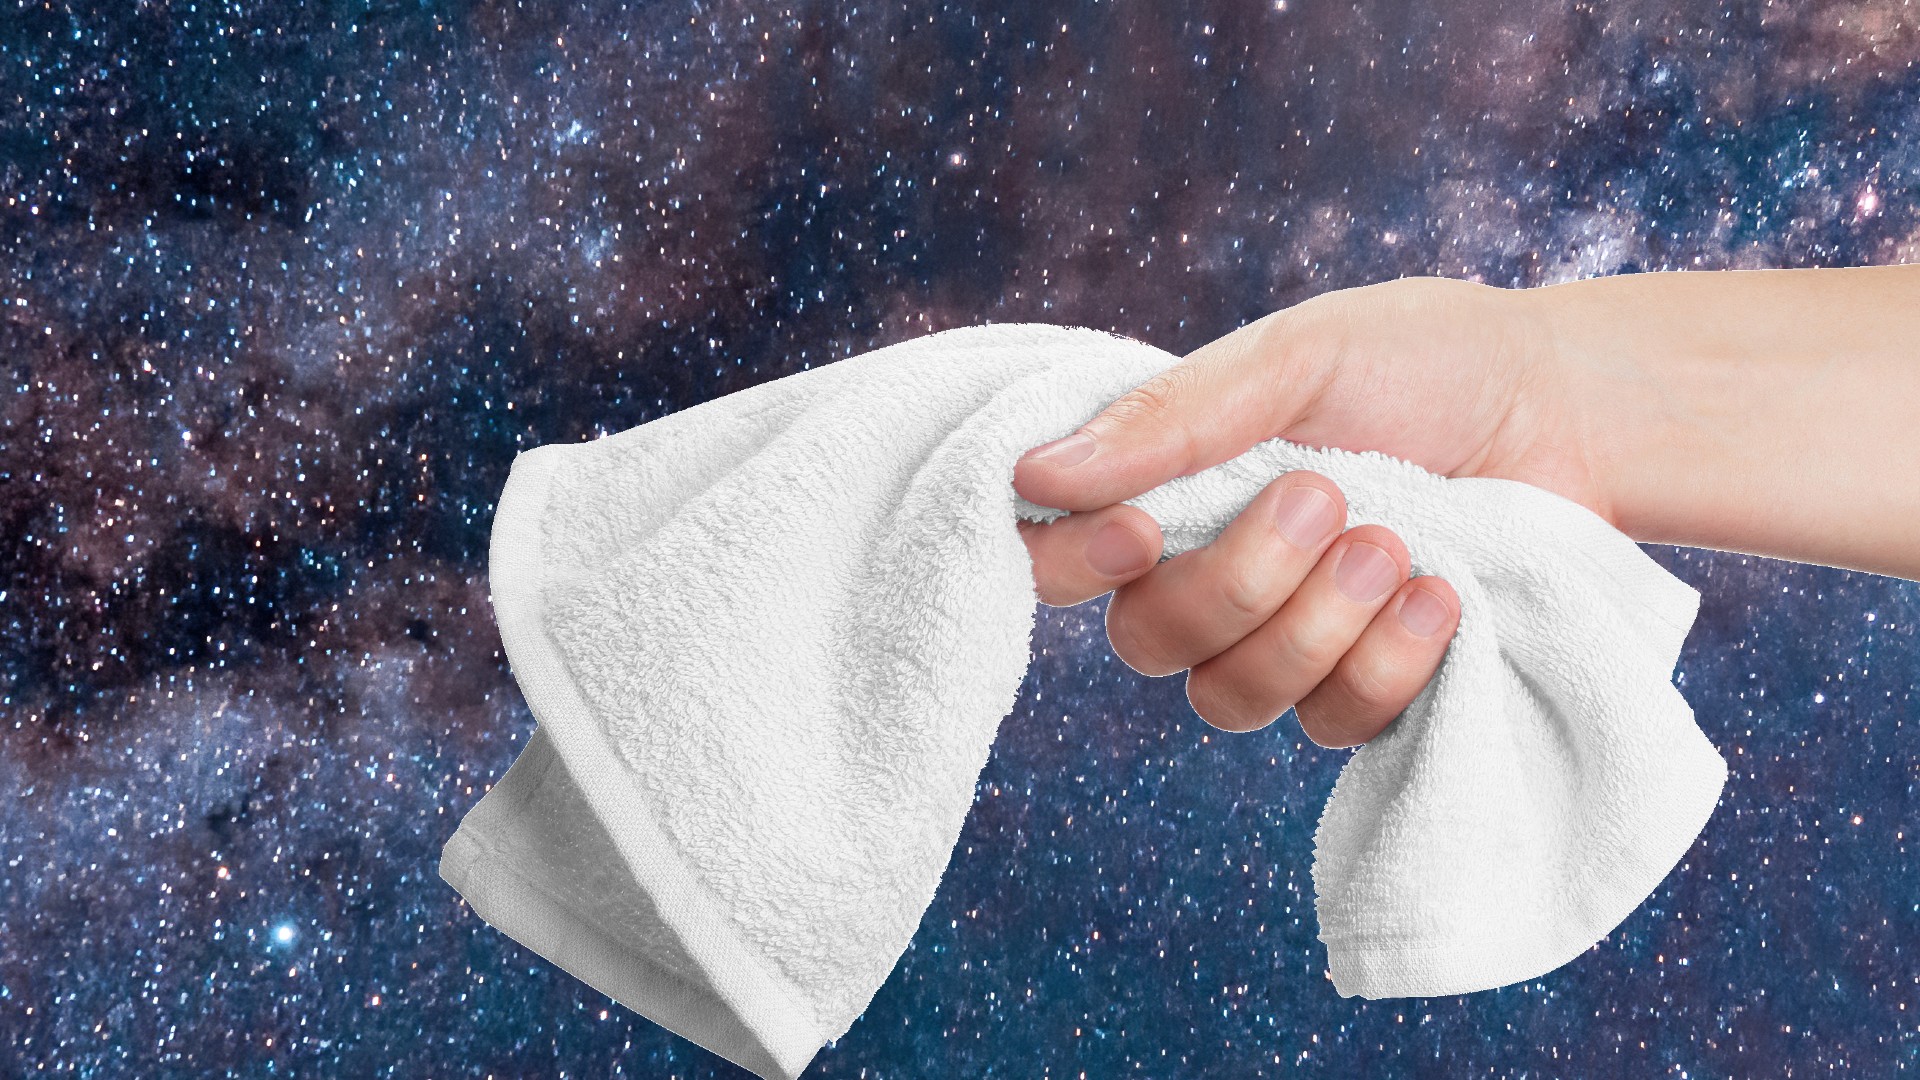 Today is Towel Day! Salute the legacy of 'The Hitchhiker's Guide to the Galaxy' author Douglas Adams thumbnail